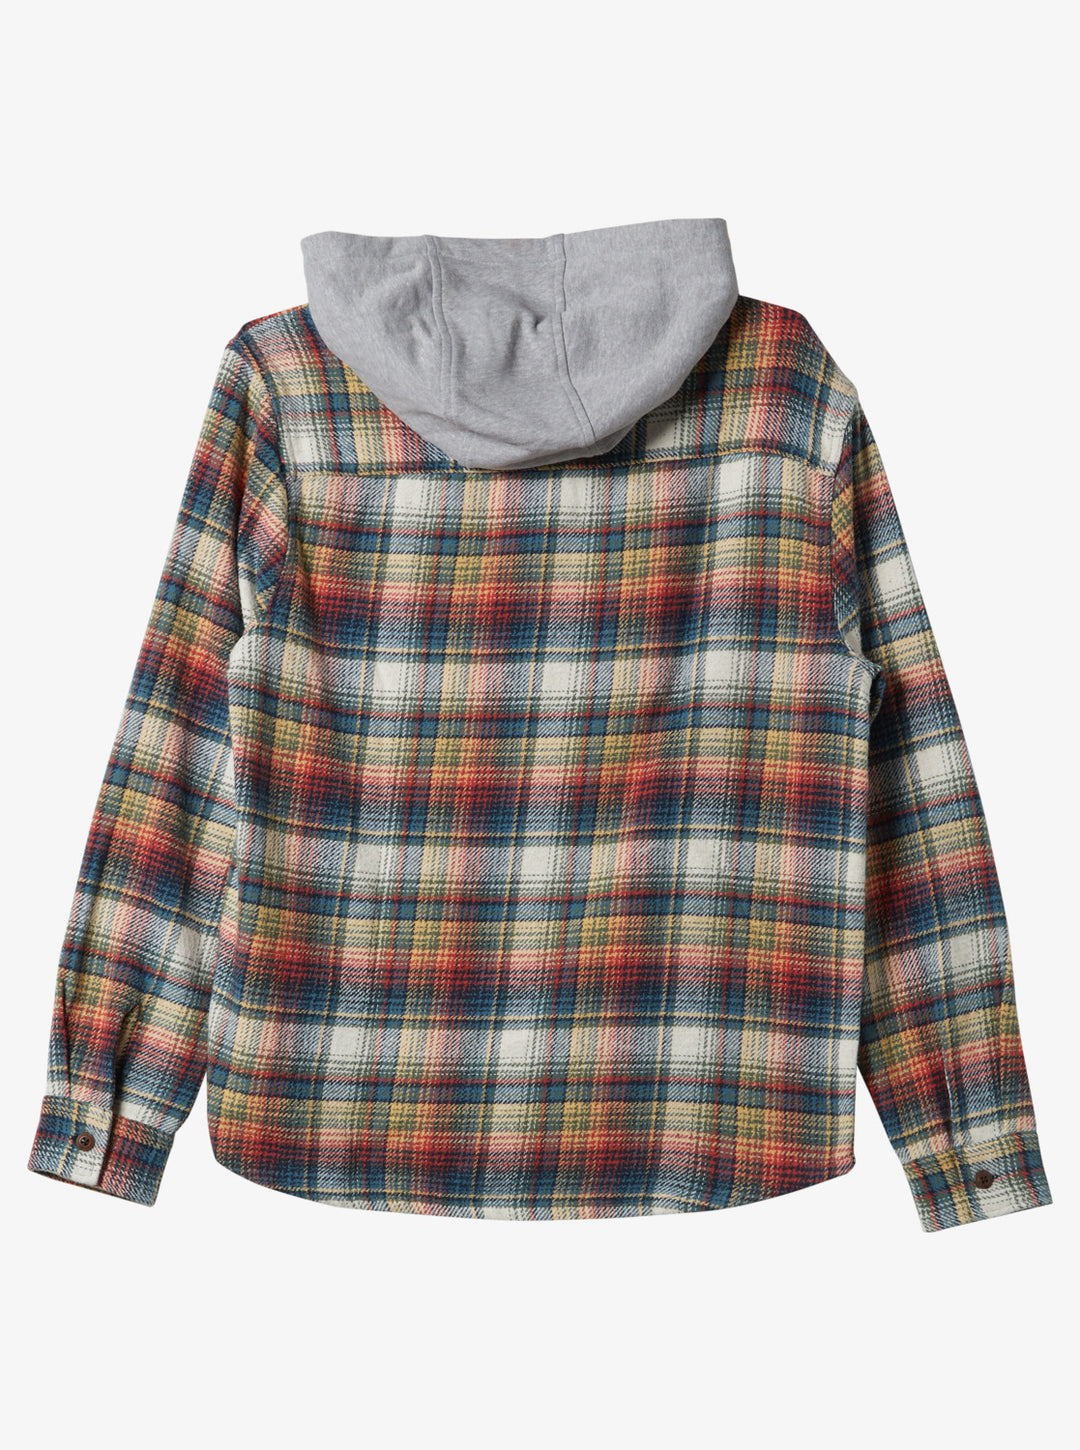 Quiksilver Briggs Hooded Flannel Long Sleeve Top - Mineral Red - Sun Diego Boardshop